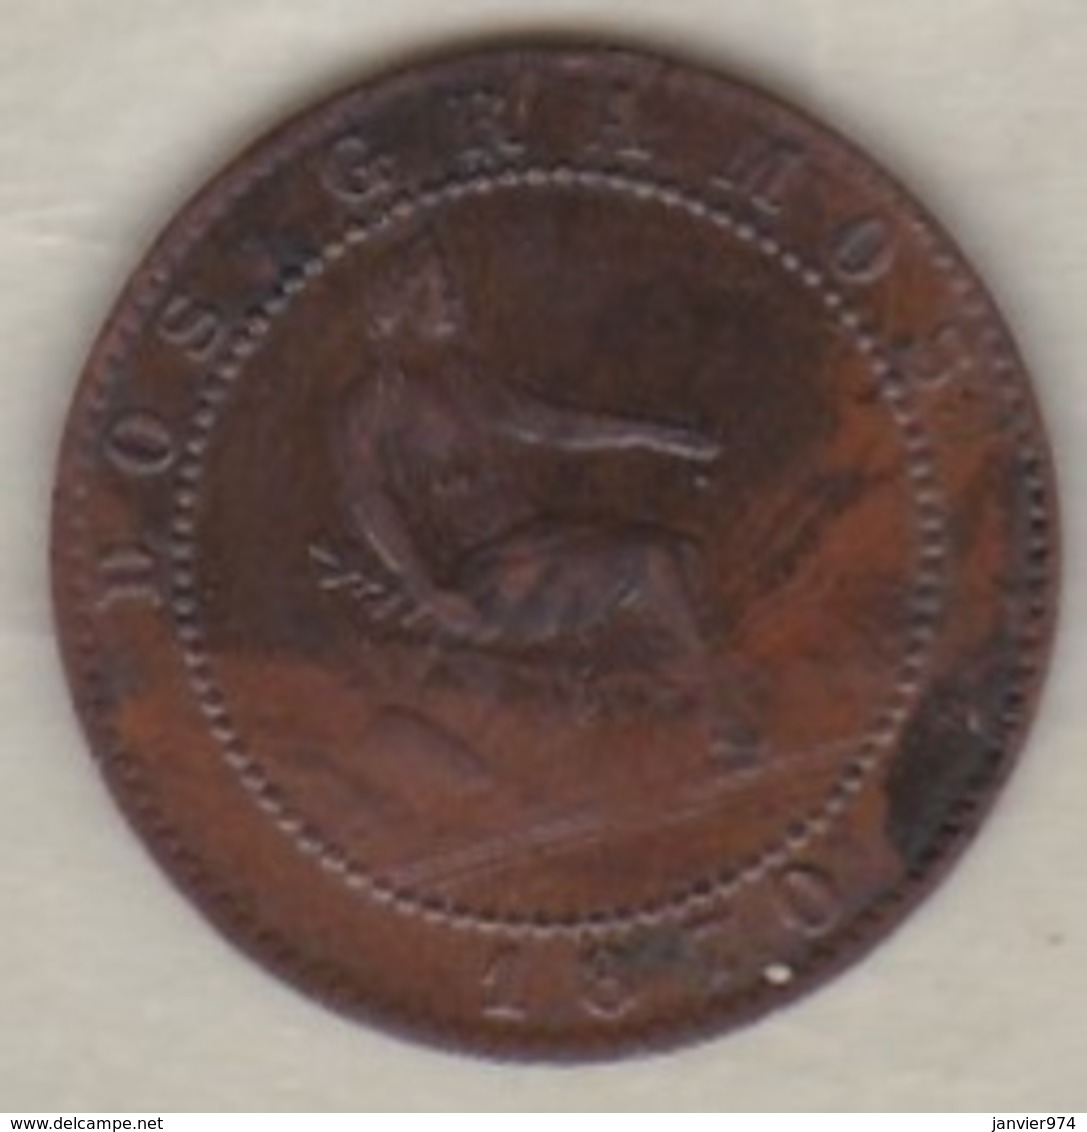 Provisional Government, 2 Centimos 1870 - First Minting